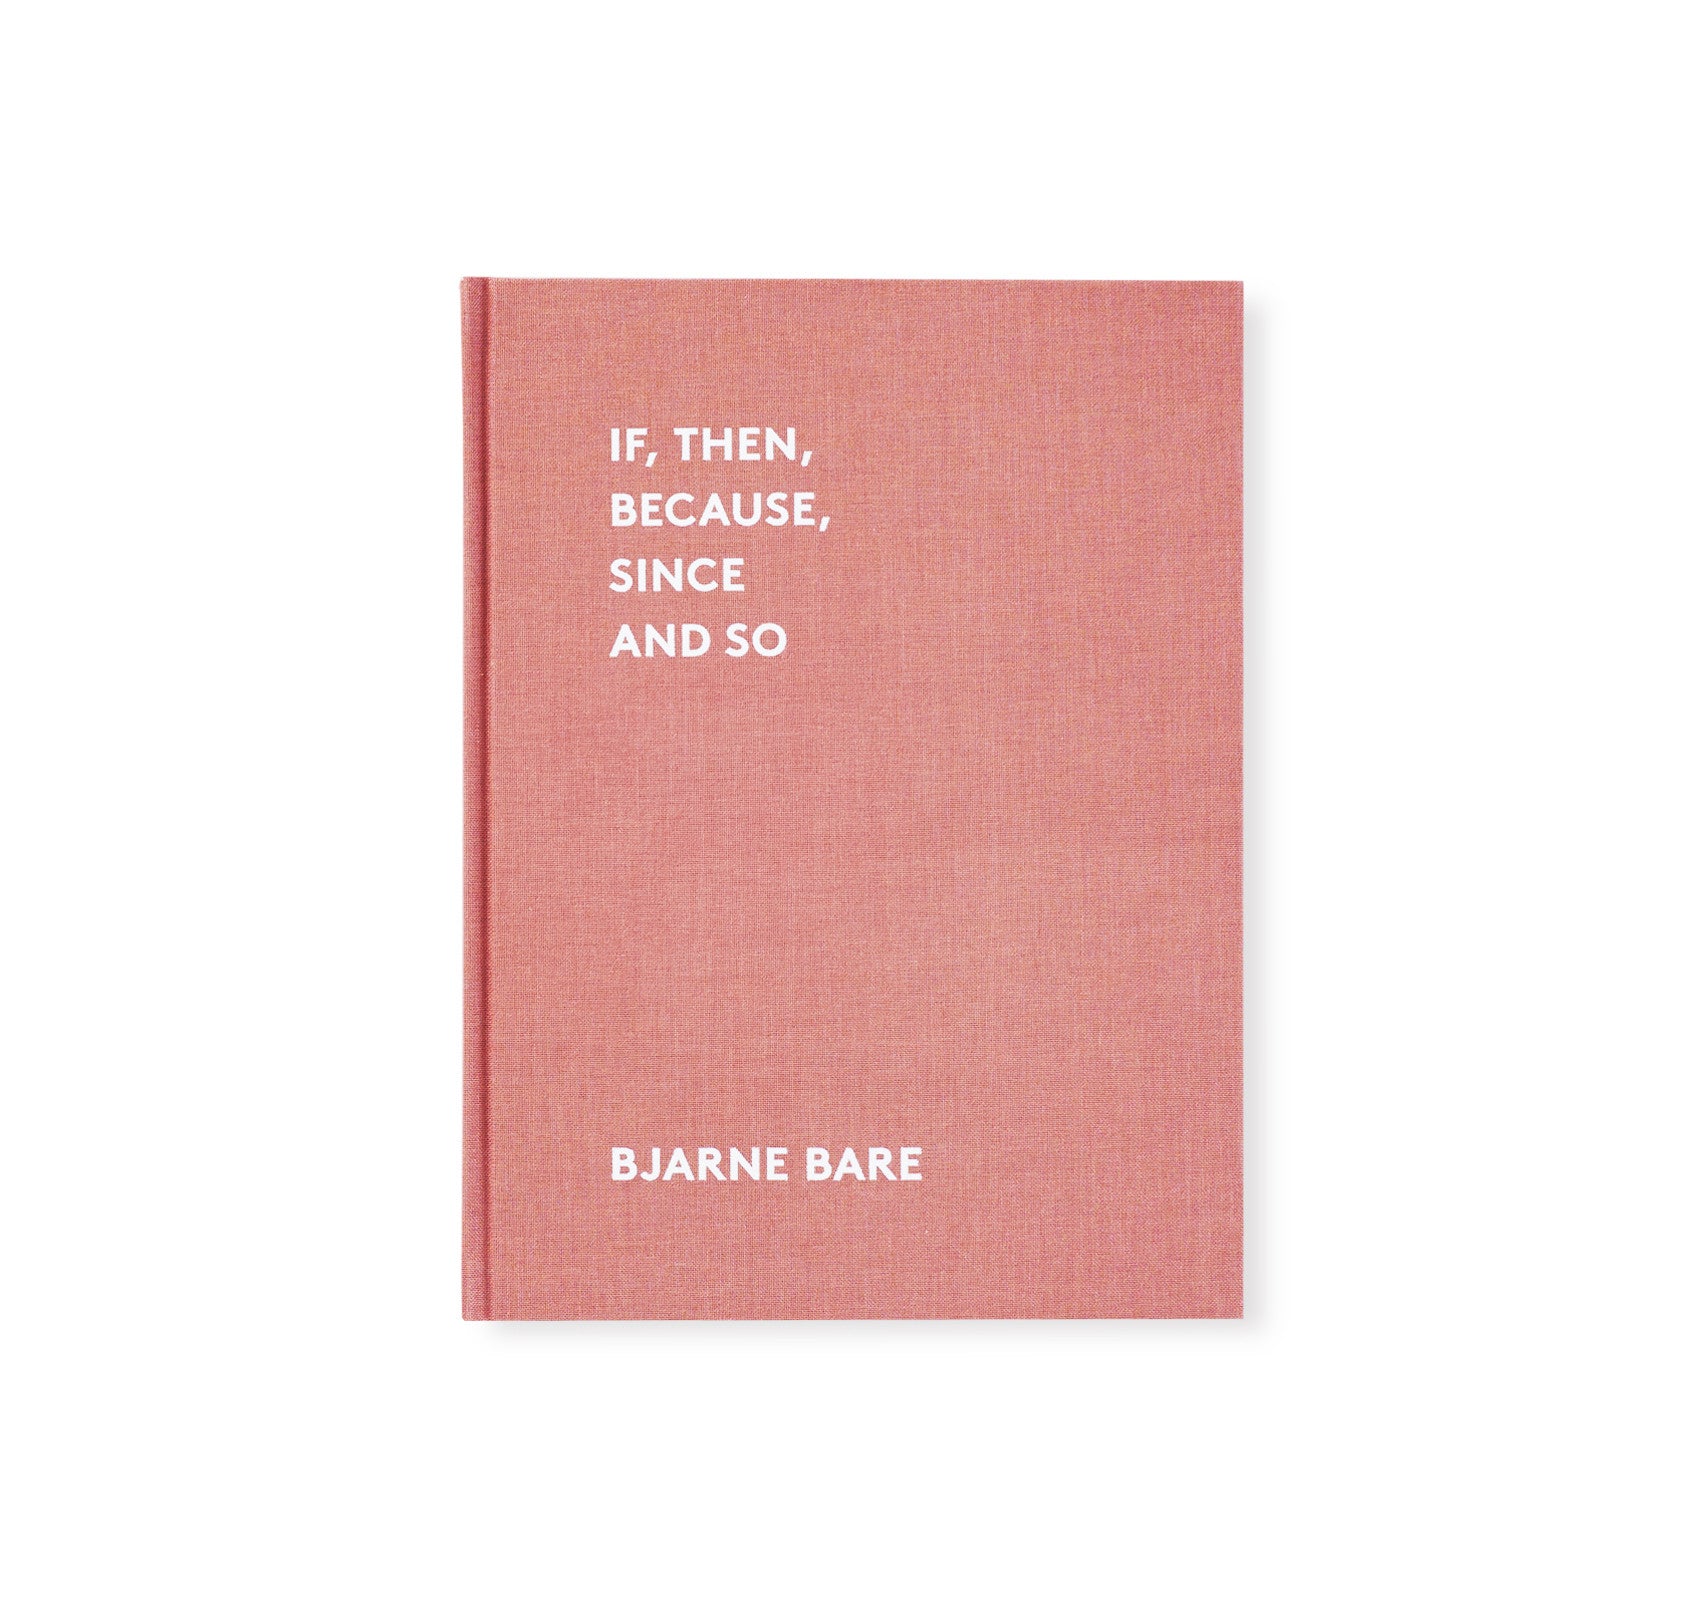 IF, THEN, BECAUSE, SINCE AND SO by Bjarne Bare